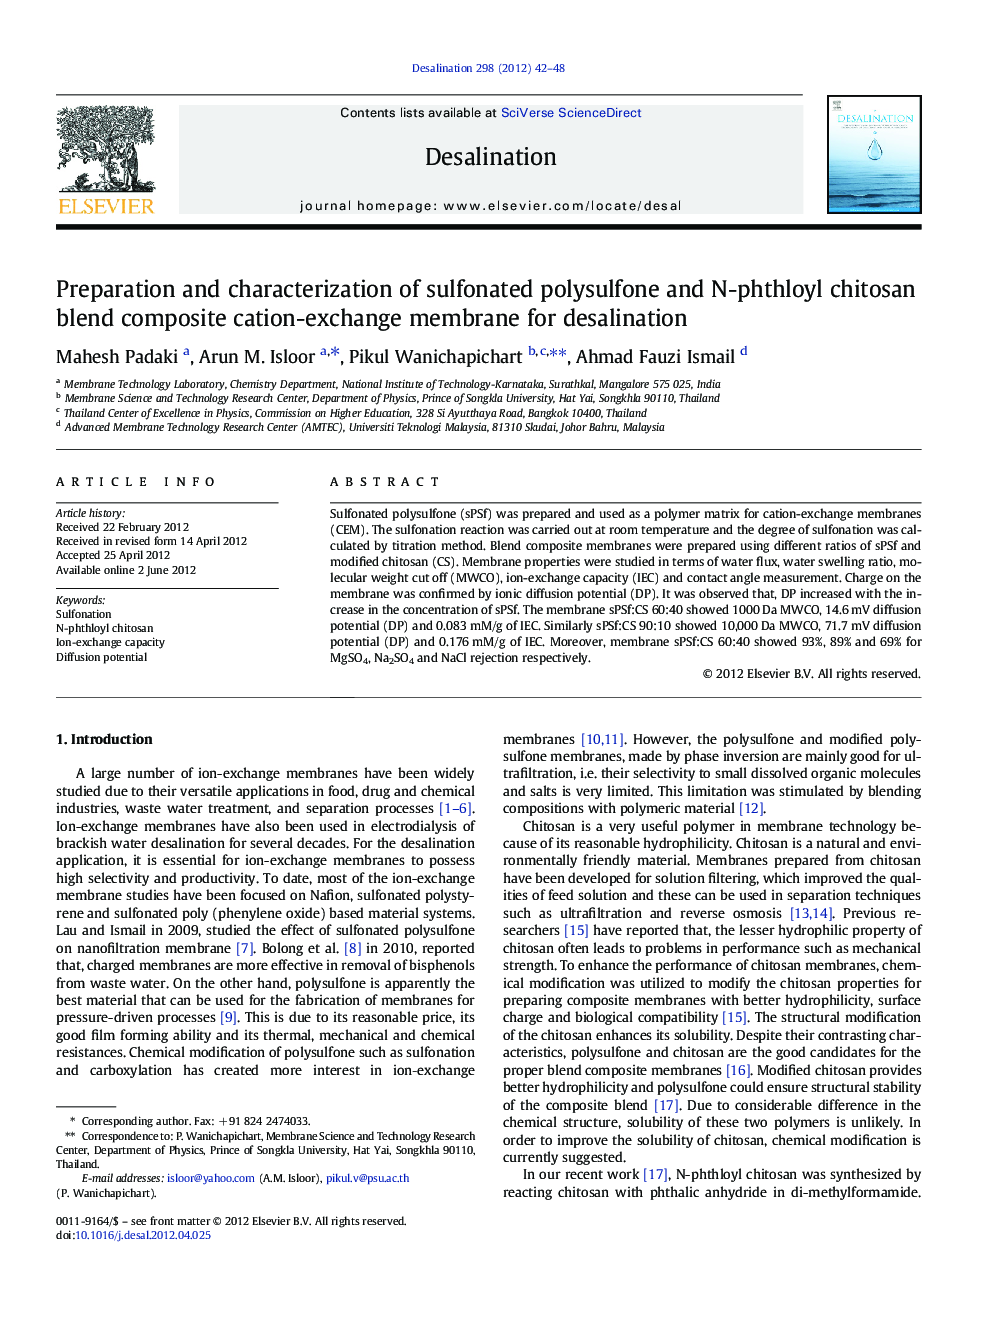 Preparation and characterization of sulfonated polysulfone and N-phthloyl chitosan blend composite cation-exchange membrane for desalination